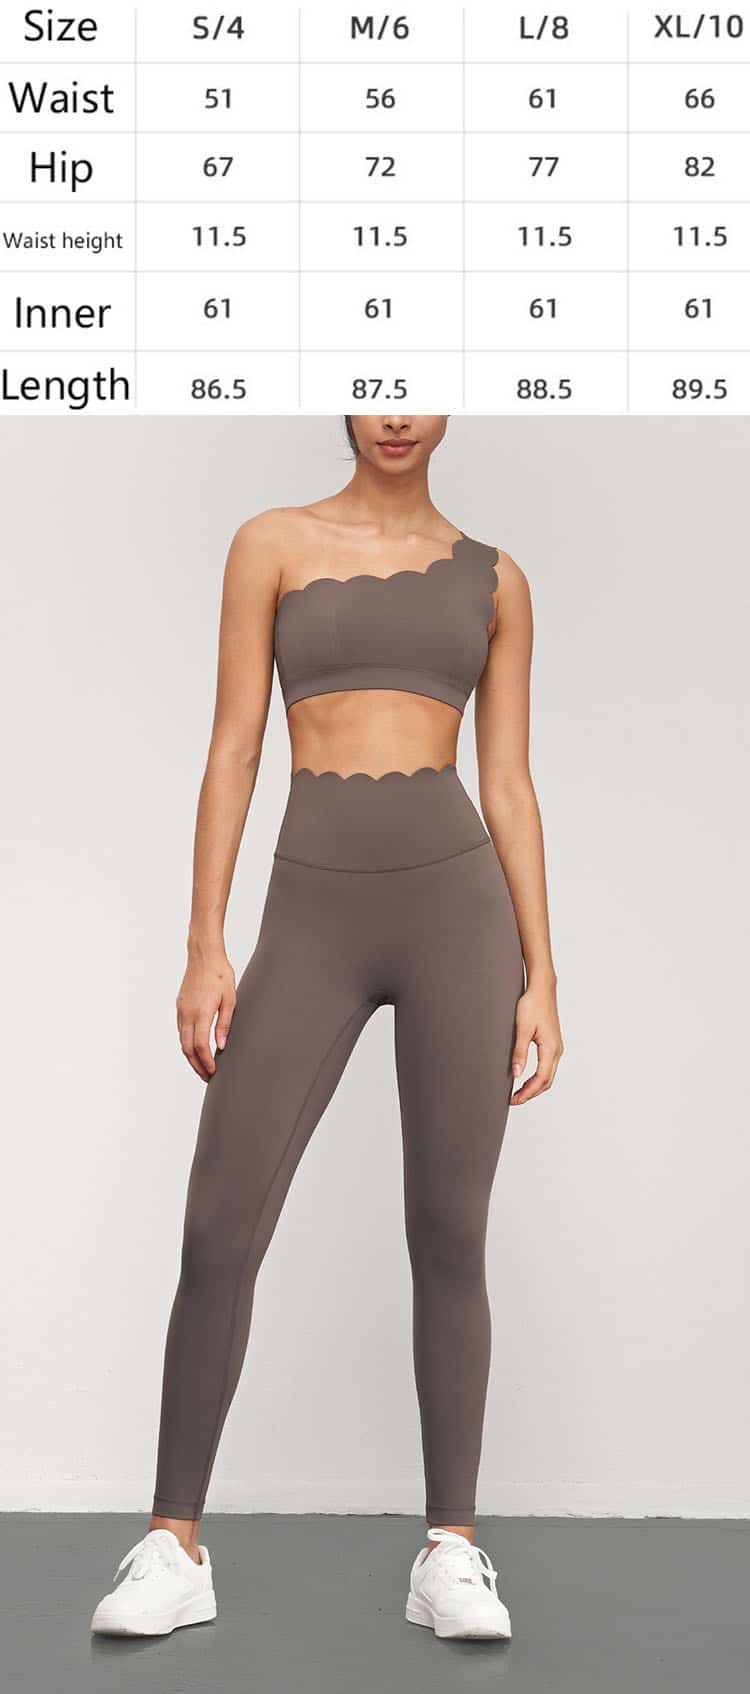 Sports direct yoga pants are placed on one side of pants or at the ankles to highlight personality and fashion sense